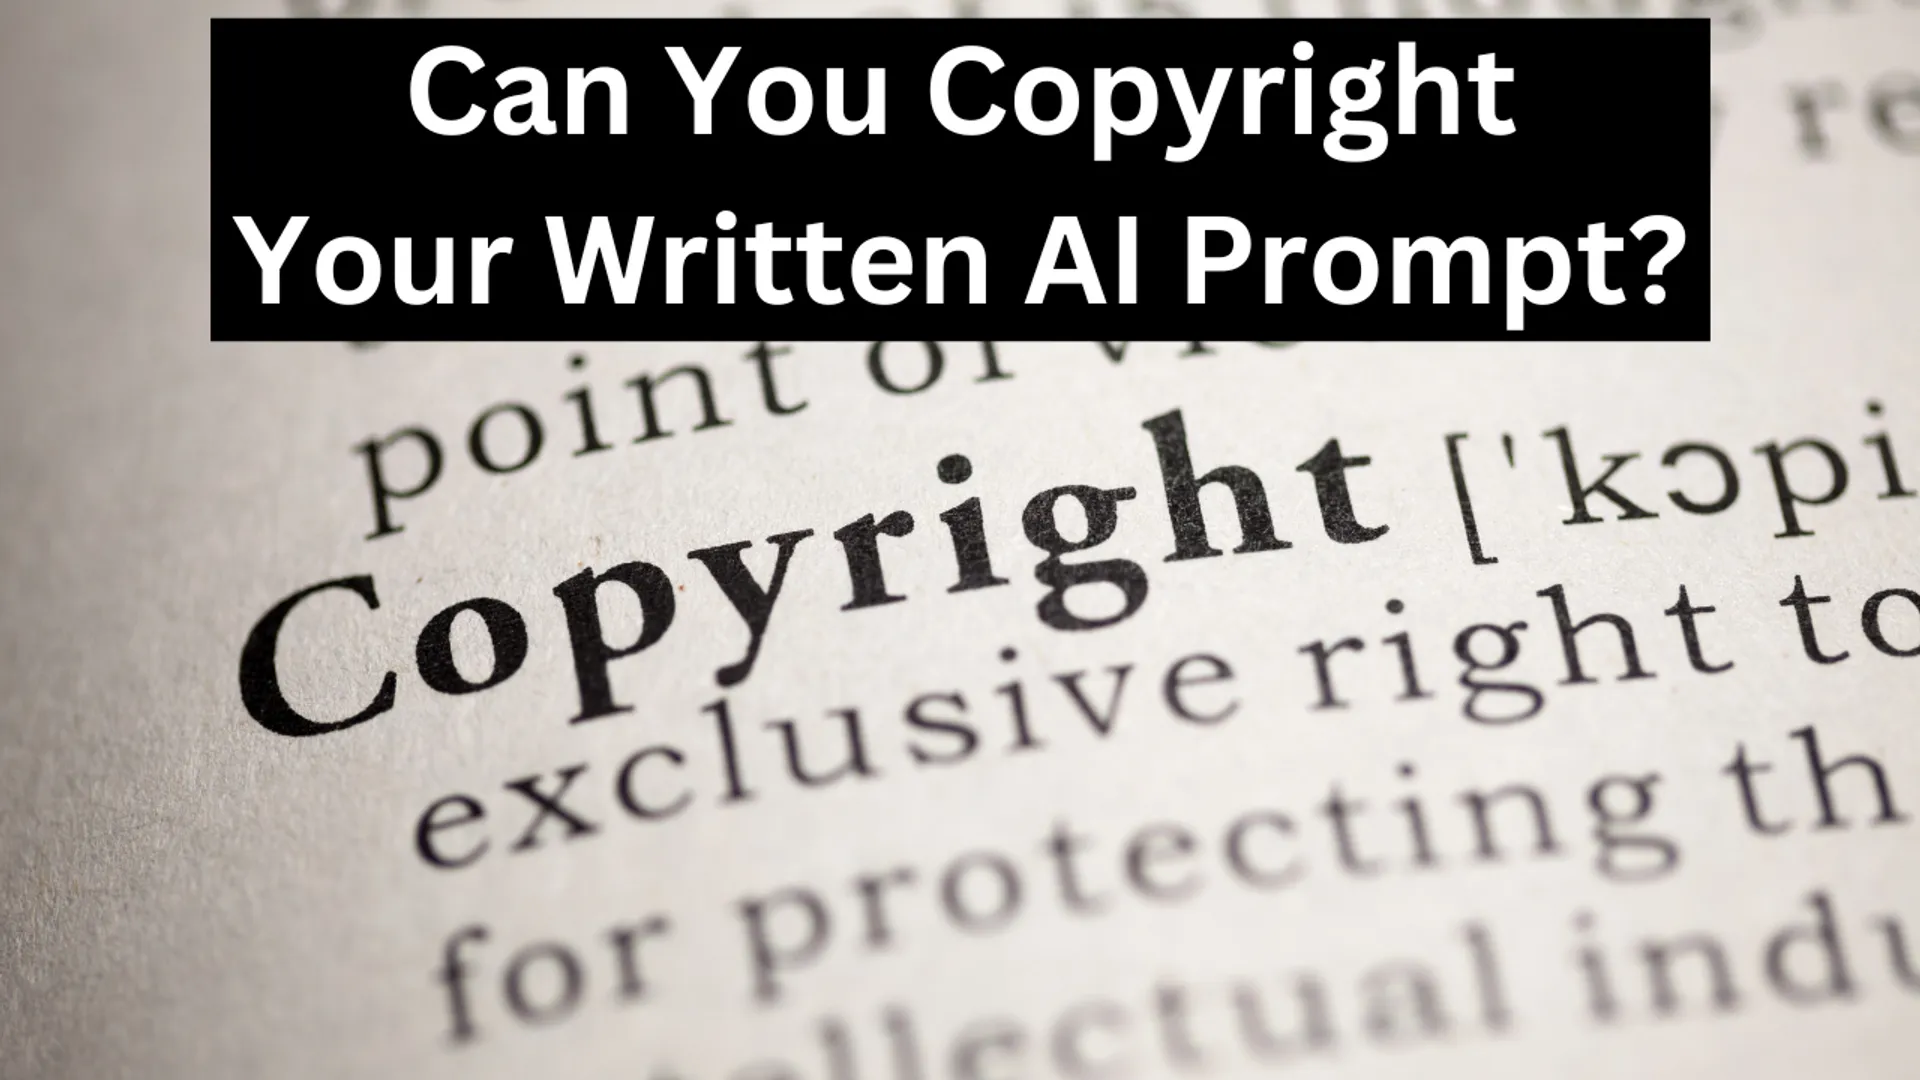 Can you copyright your written AI prompt? My Saturday morning thoughts. 🤓
https://www.linkedin.com/pulse/can-you-copyright-your-written-ai-prompt-mitch-jackson-esq-